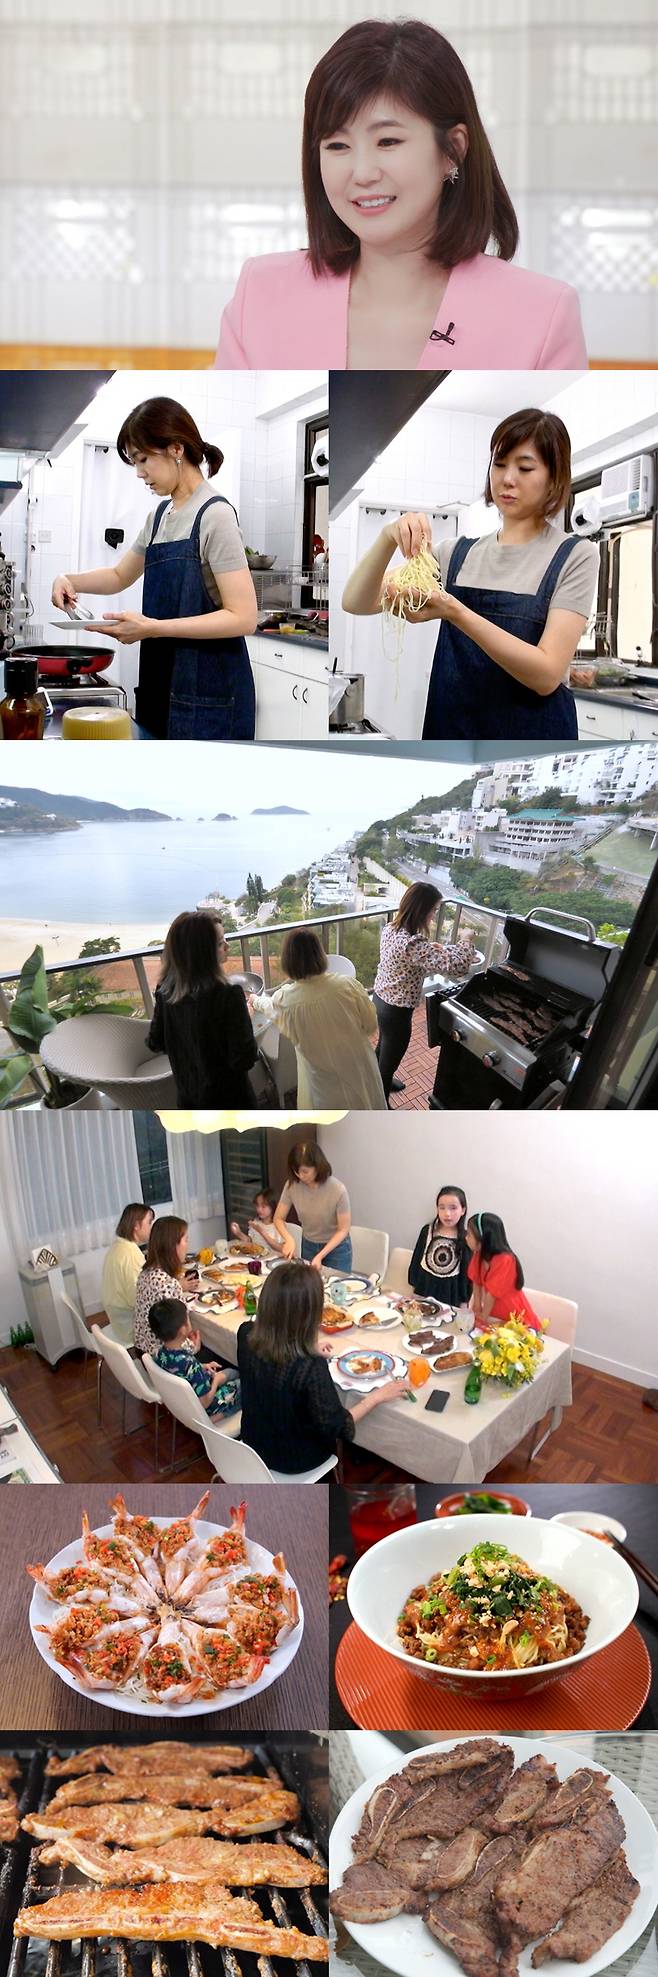 Broadcaster Kang Soo-jung hosts a luxury home party.KBS2 Stars Top Recipe at Fun-Staurant (hereinafter Stars Top Recipe at Fun-Staurant), which will be broadcasted on the 5th, will show Hong Kong gourmet life of NEW chef Kang Soo-jung.Kang Soo-jung proves his extraordinary cooking skills by completing a whopping 10 servings of food for 2 hours, and it is noteworthy that the taste of Korean conveyed by Kang Soo-jung will capture global taste.Kang Soo-jung in the VCR, which is open to the public on this day, unveiled the market of Hong Kong, which usually goes to see food ingredients.Kang Soo-jung, who said, Hong Kongs character sells and sells to go to various markets, meticulously bought vegetables, seafood, and traditional spices, and then returned home and started cooking diligently.It turns out that Bernadetta Machala-Krzeminska, who has been raising children since she was a child, invited her friends and mothers.Kang Soo-jungs home party photos, I usually like to invite guests to eat, were released together with the Stars Top Recipe at Fun-Staurant family.On this day, Kang Soo-jung, like the queen of the home party, made more than 7 kinds of party dishes for 10 people including Hong Kong-style garlic shrimp steamed, Bibim tannin, cheese kimchi fried rice,Hong kong house Kang Soo-jungs amazing cooking skills were as eye-catching as the Korean menus.Kang Soo-jung, who was released on the last broadcast, collected kimchi fried rice with cheese and added flavor from homemade mung bean, and LA ribs made with homemade Korean spices.In particular, the nationality of mothers and children who visited Kang Soo-jungs house on the same day was also different from that of Hong Kong, an international city, and everyone in the Stars Top Recipe at Fun-Staurant family wondered how they would react to the Korean menu.When the guests arrived earlier than expected, Kang Soo-jung asked Bernadetta Machala-Krzeminska to bake the LA ribs she had pre-marinated to her friends.Kang Soo-jung said, Everyone usually likes Korean a lot.So every time I invite them, I make Korean, and my mothers help me like this. Hong Kong Repulse Bay Everyone admired the scenery of multinational mothers baking LA ribs together in the background of the Océan view.Did Kang Soo-jung succeed in making 10 servings of 7 dishes in 2 hours? Did Kang Soo-jungs dish capture global taste?Kang Soo-jung is also known to have a special reason to live in Hong Kong and often hold home parties.On the other hand, Stars Top Recipe at Fun-Staurant is a new concept convenience store survival program that is released at convenience stores nationwide on the day after the broadcast, It is broadcasted at 30 minutes.